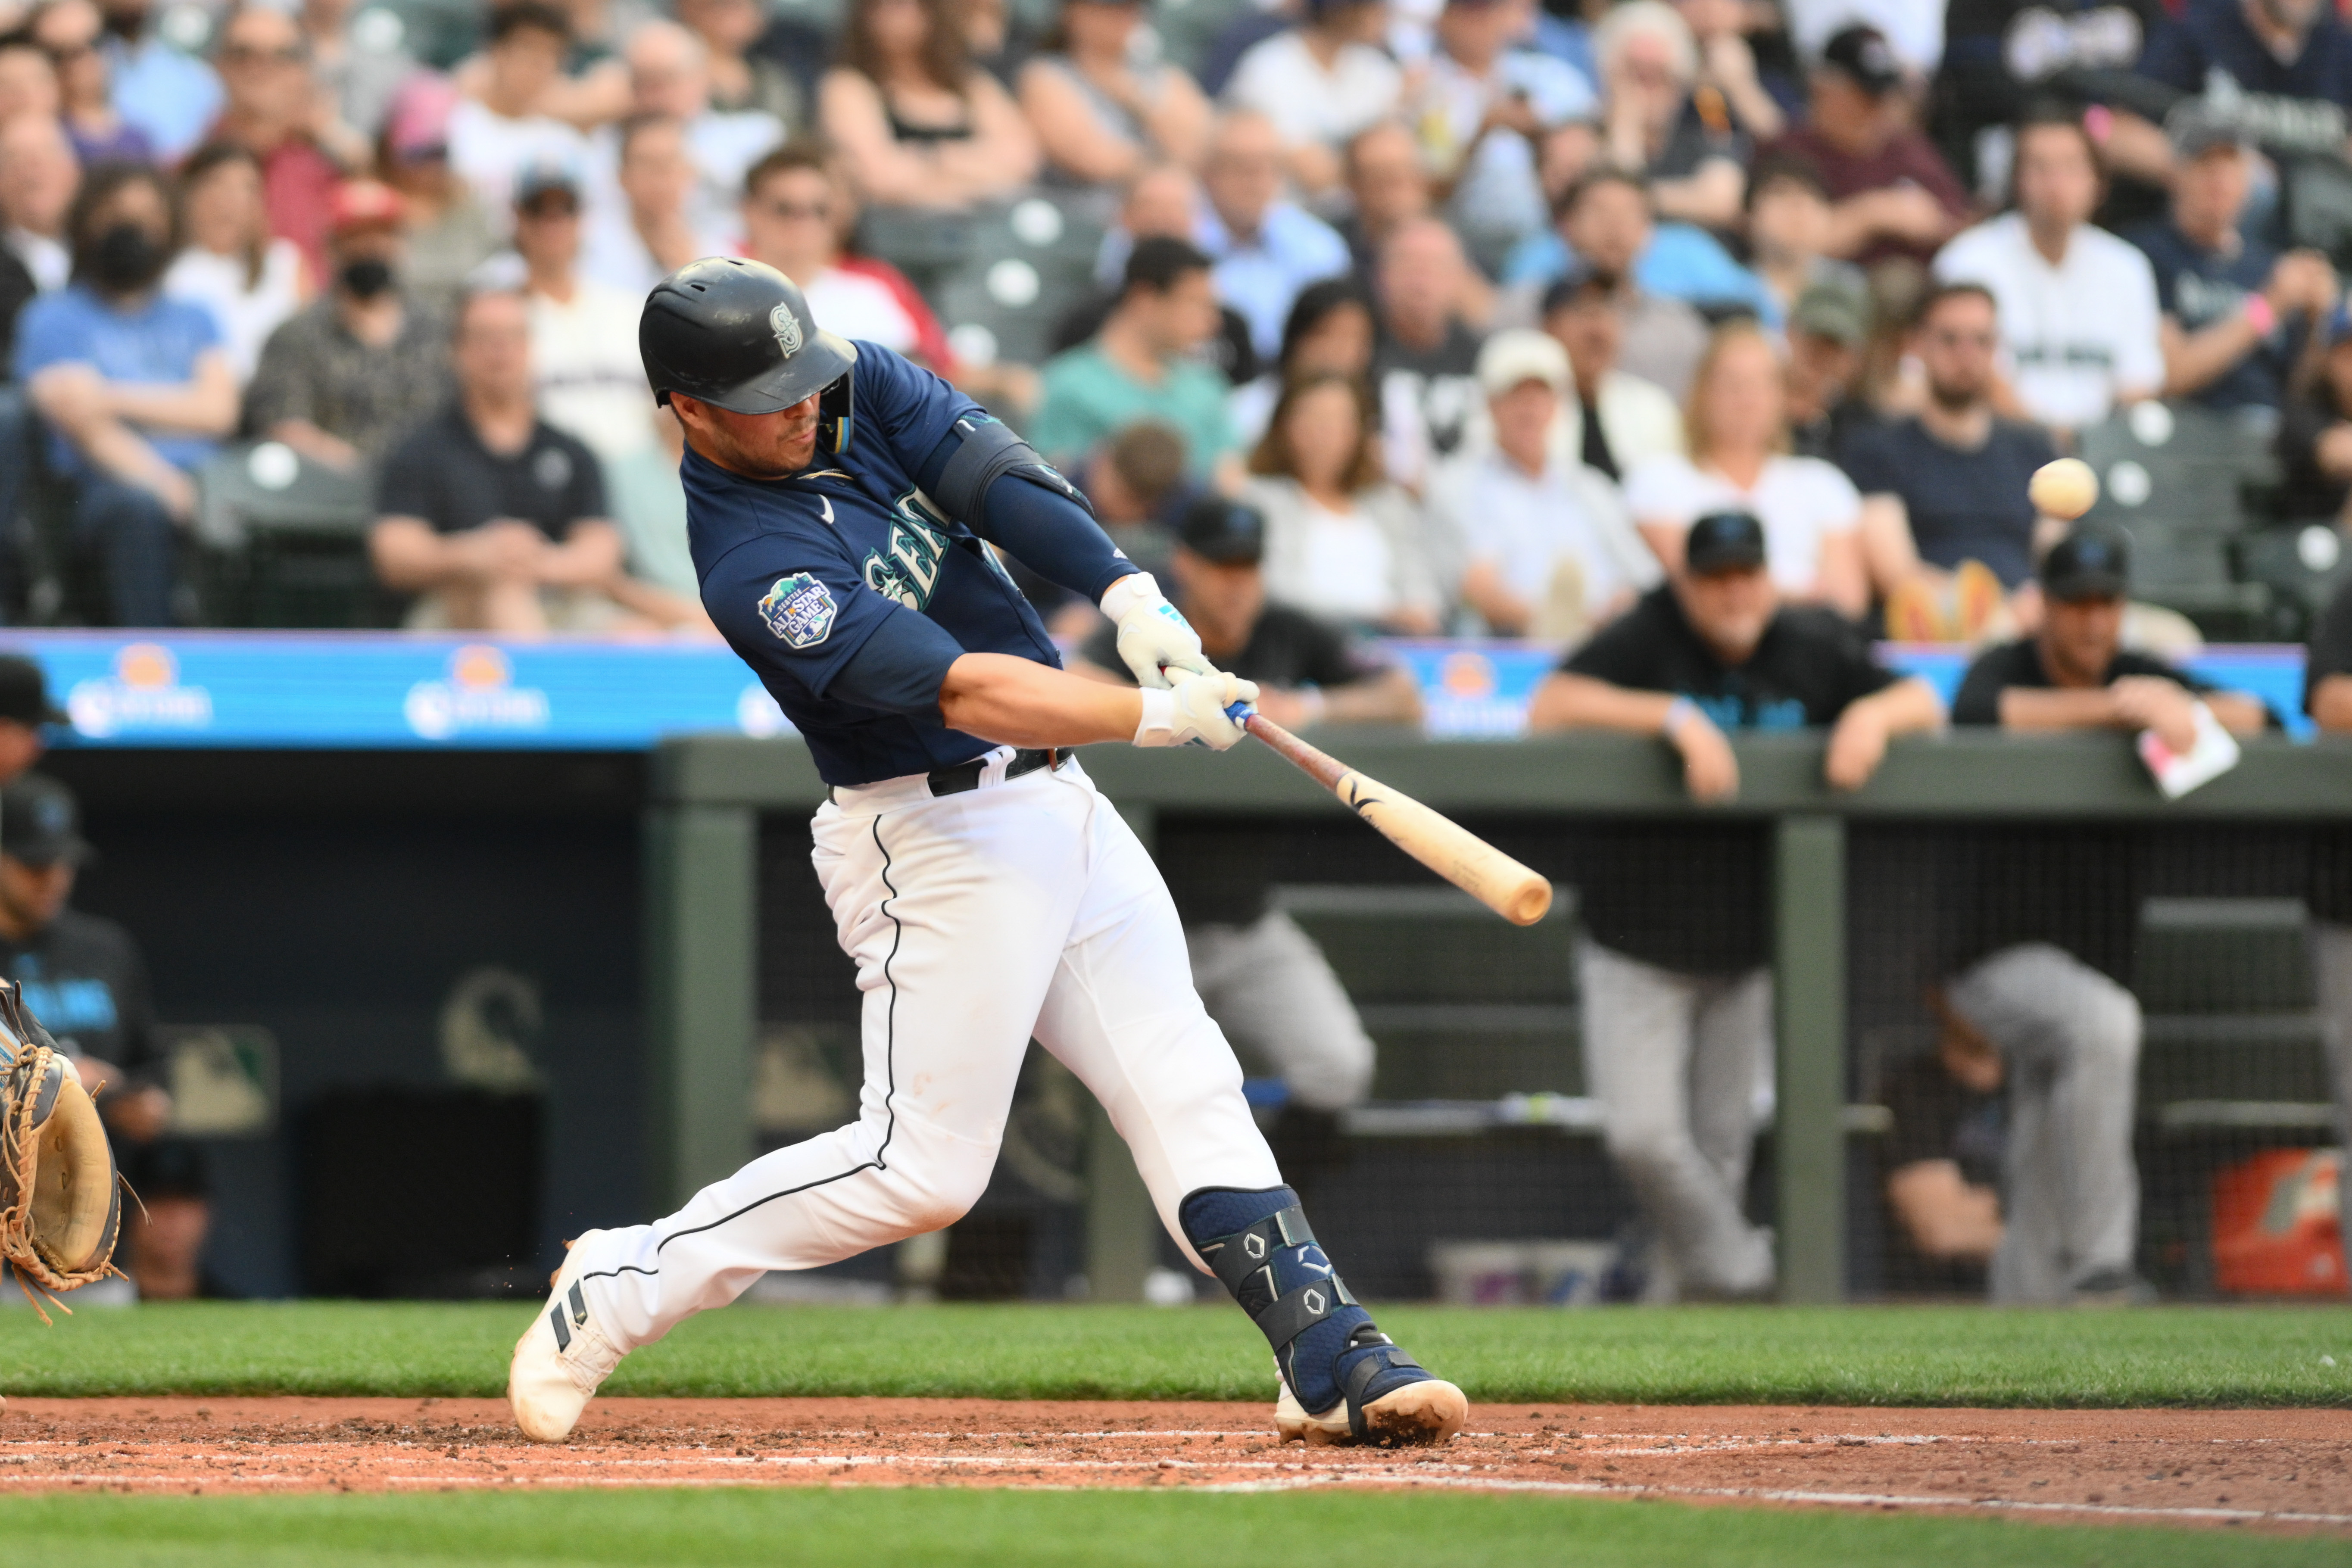 Mariners maul Marlins behind homers, rookie pitcher